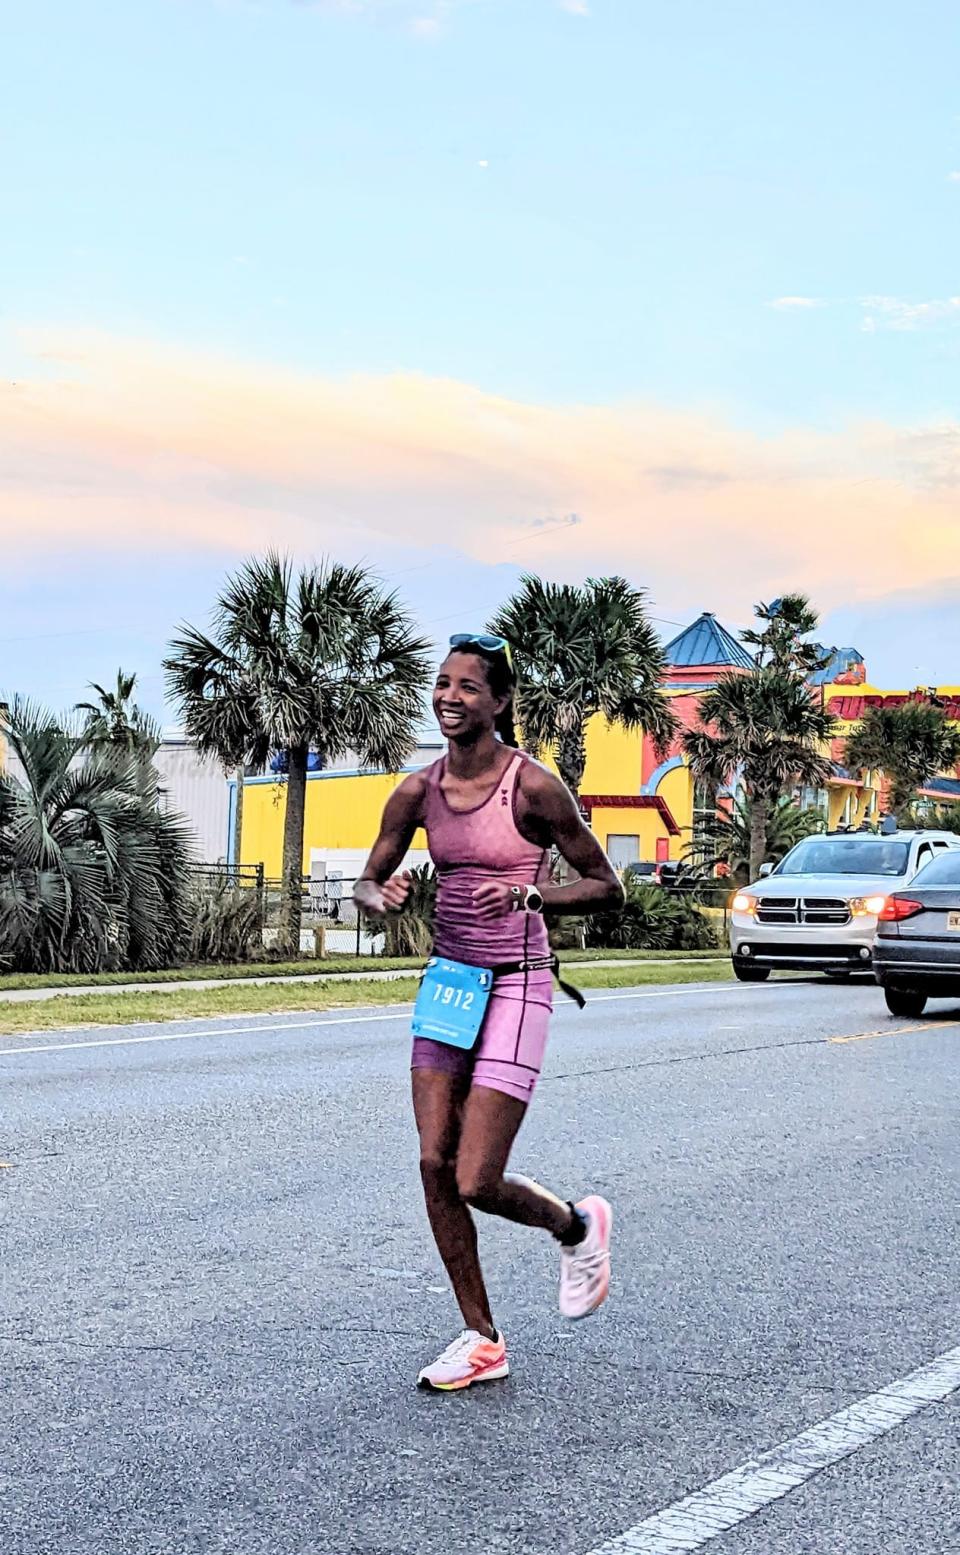 Jamila Allen competed in Ironman Florida in Panama City earlier this month.